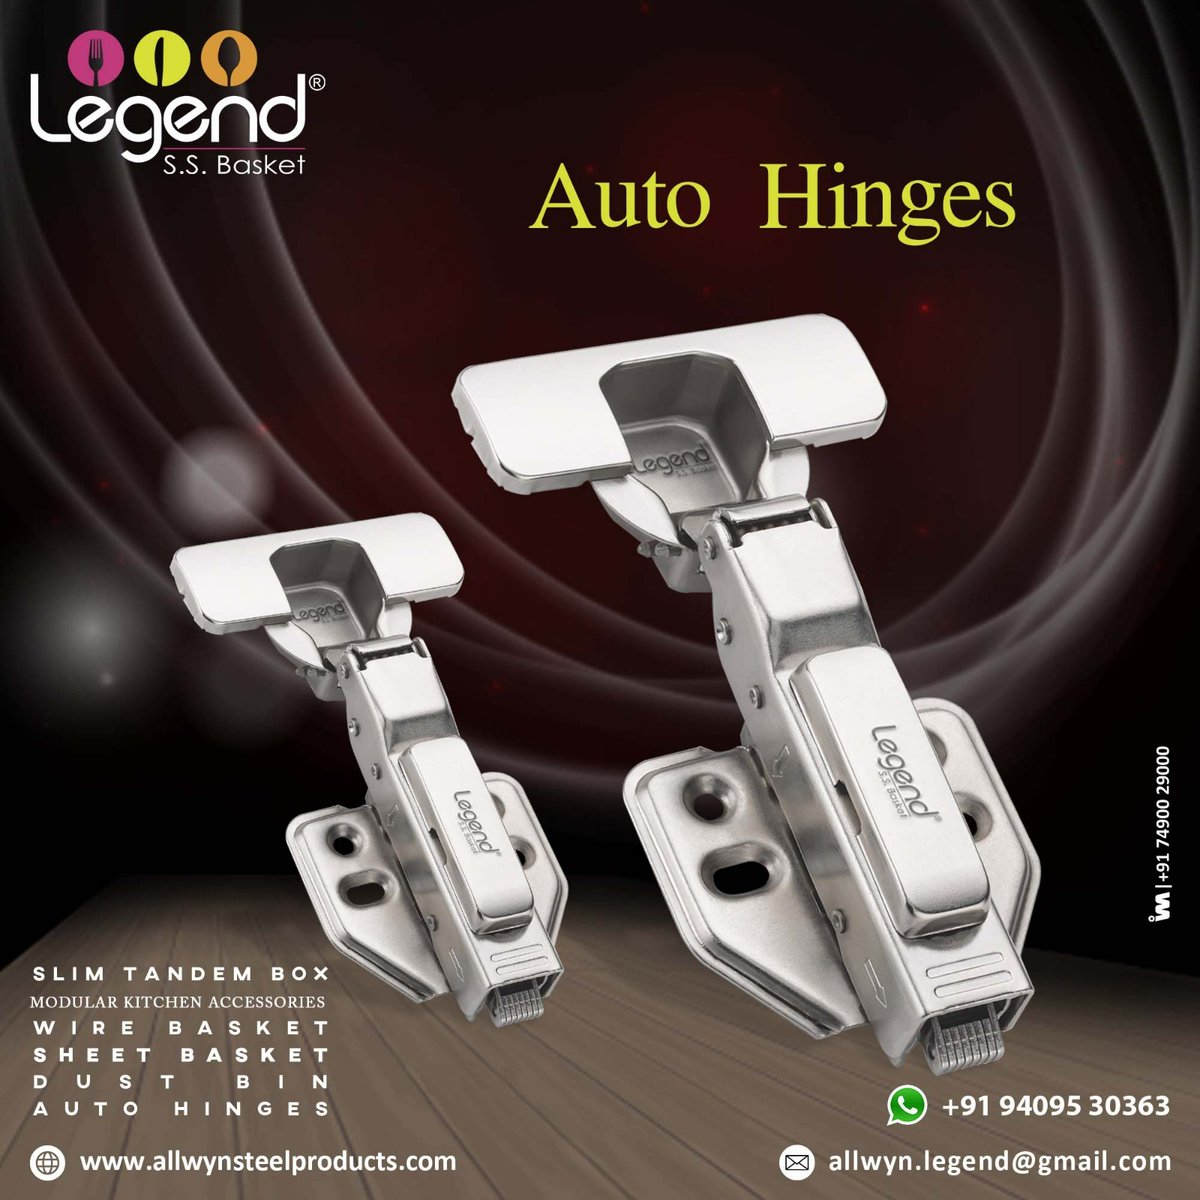 Hinge on excellence. Choose Legend #Autohinges that never let you down.
#AllwynSteelProducts #Rajkot #Legend #LegendHardware #LegendKitchen #DoorHinges #KitchenHardware #KitchenFittings #KitchenSolutions #FurnitureHardware #FurnitureFittings #KitchenBasket #KitchenAccessories